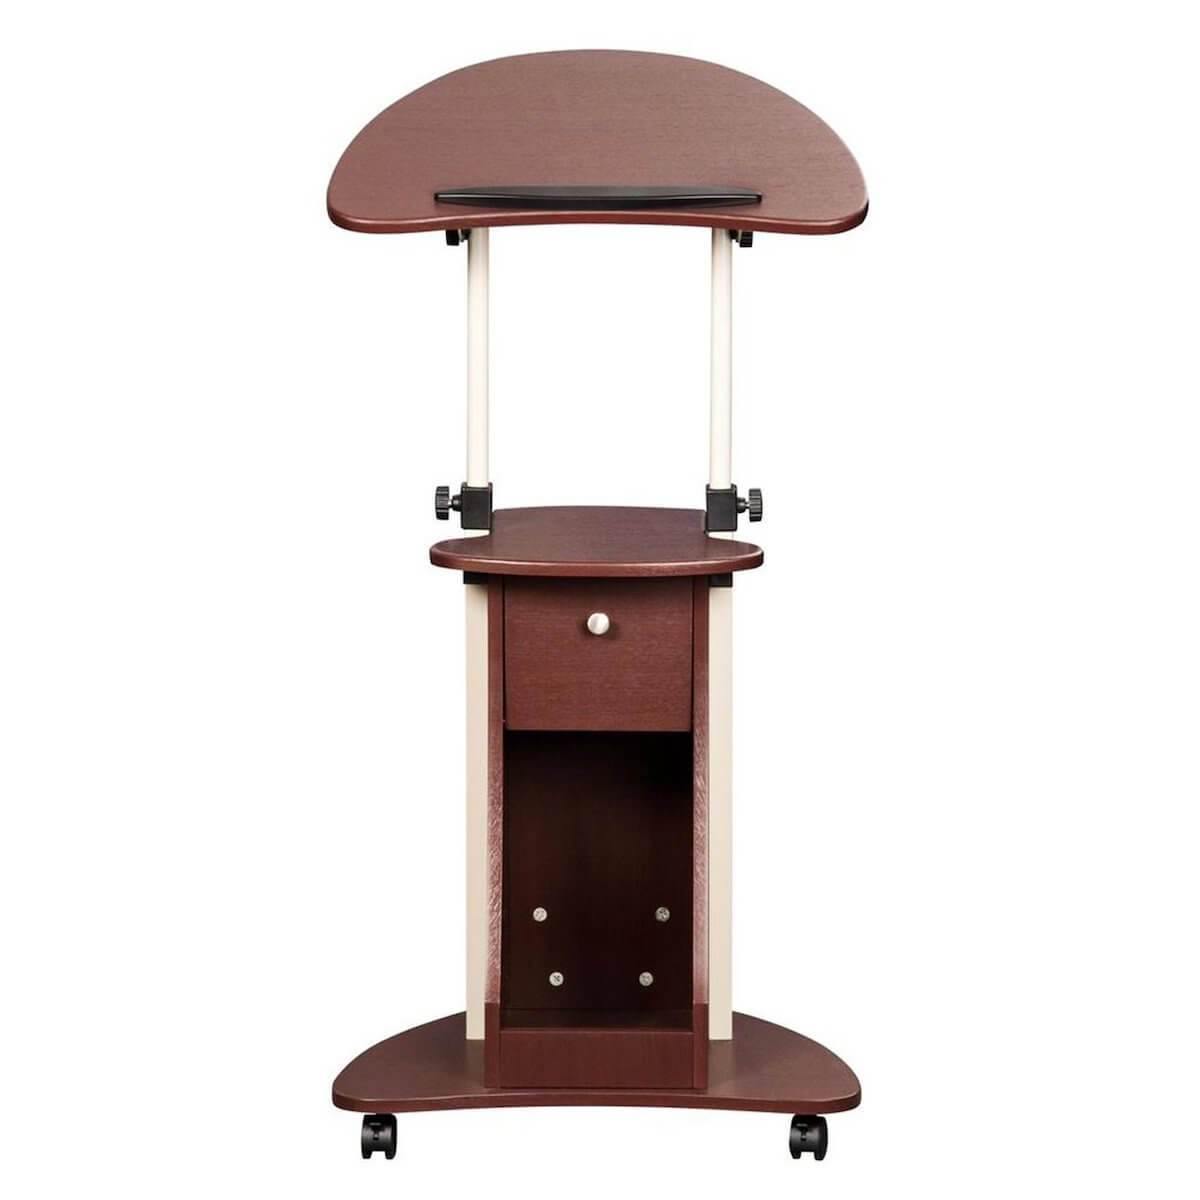 Techni Mobili Chocolate Sit-to-Stand Rolling Adjustable Laptop Cart With Storage RTA-B005-CH36 #color_chocolate